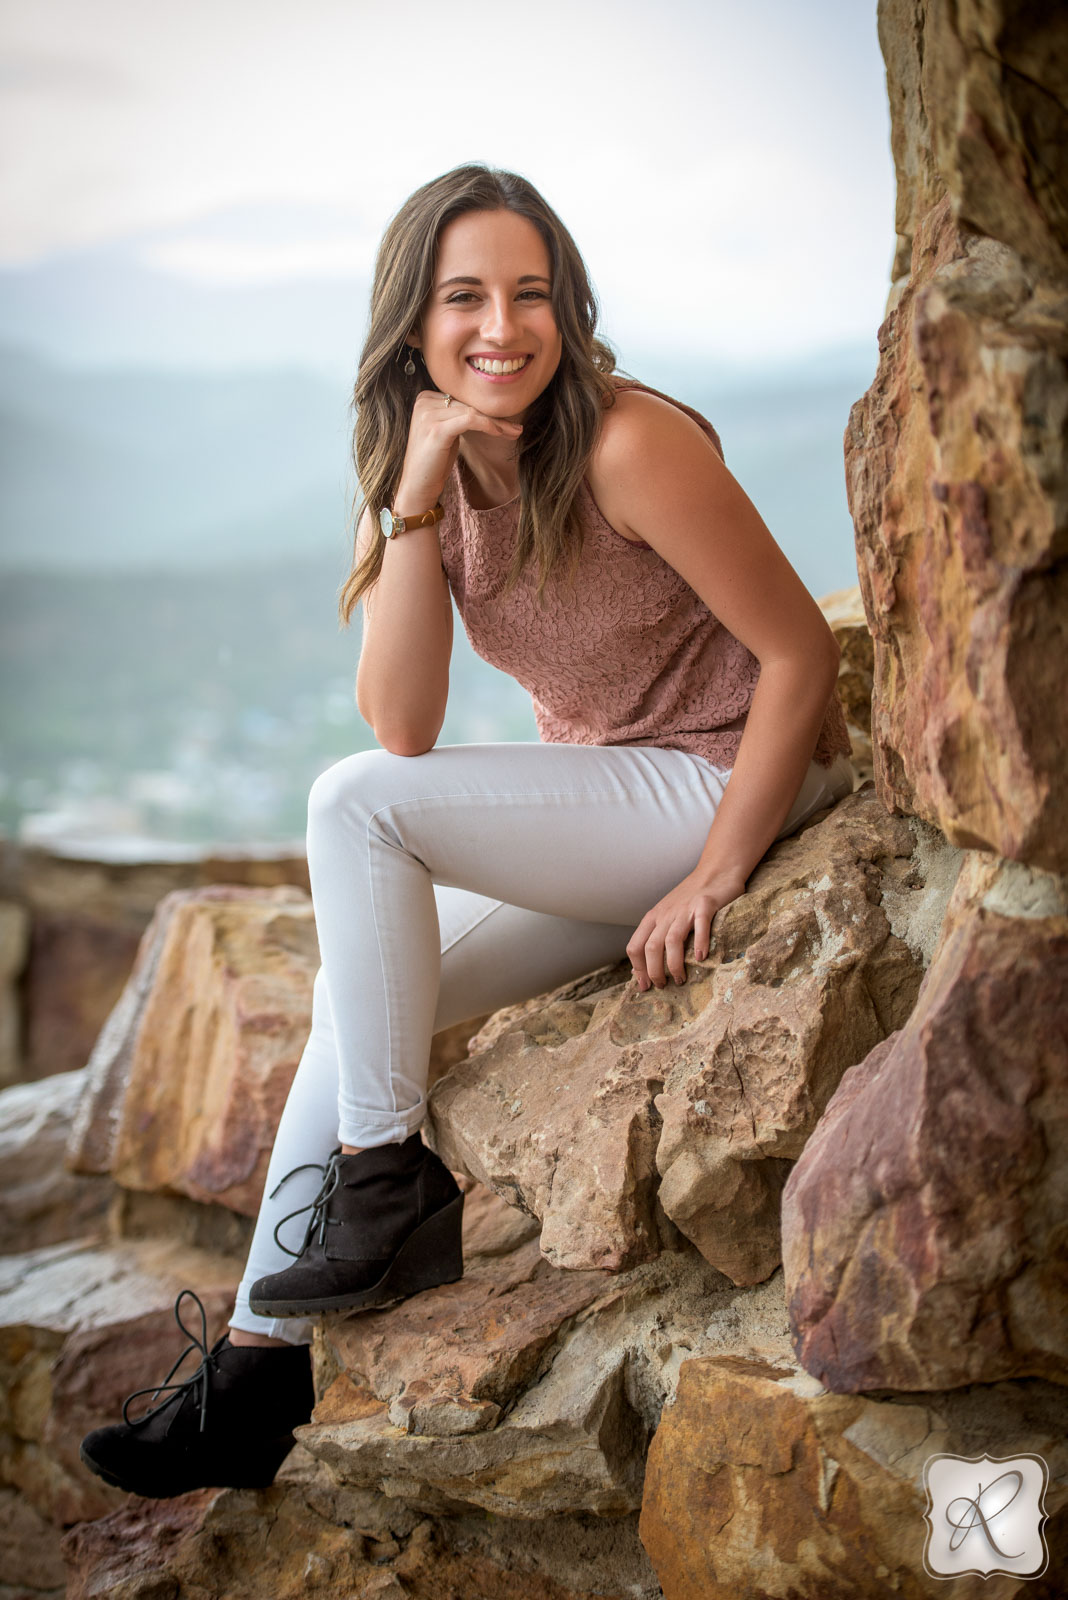 Senior pictures - sitting on a rock